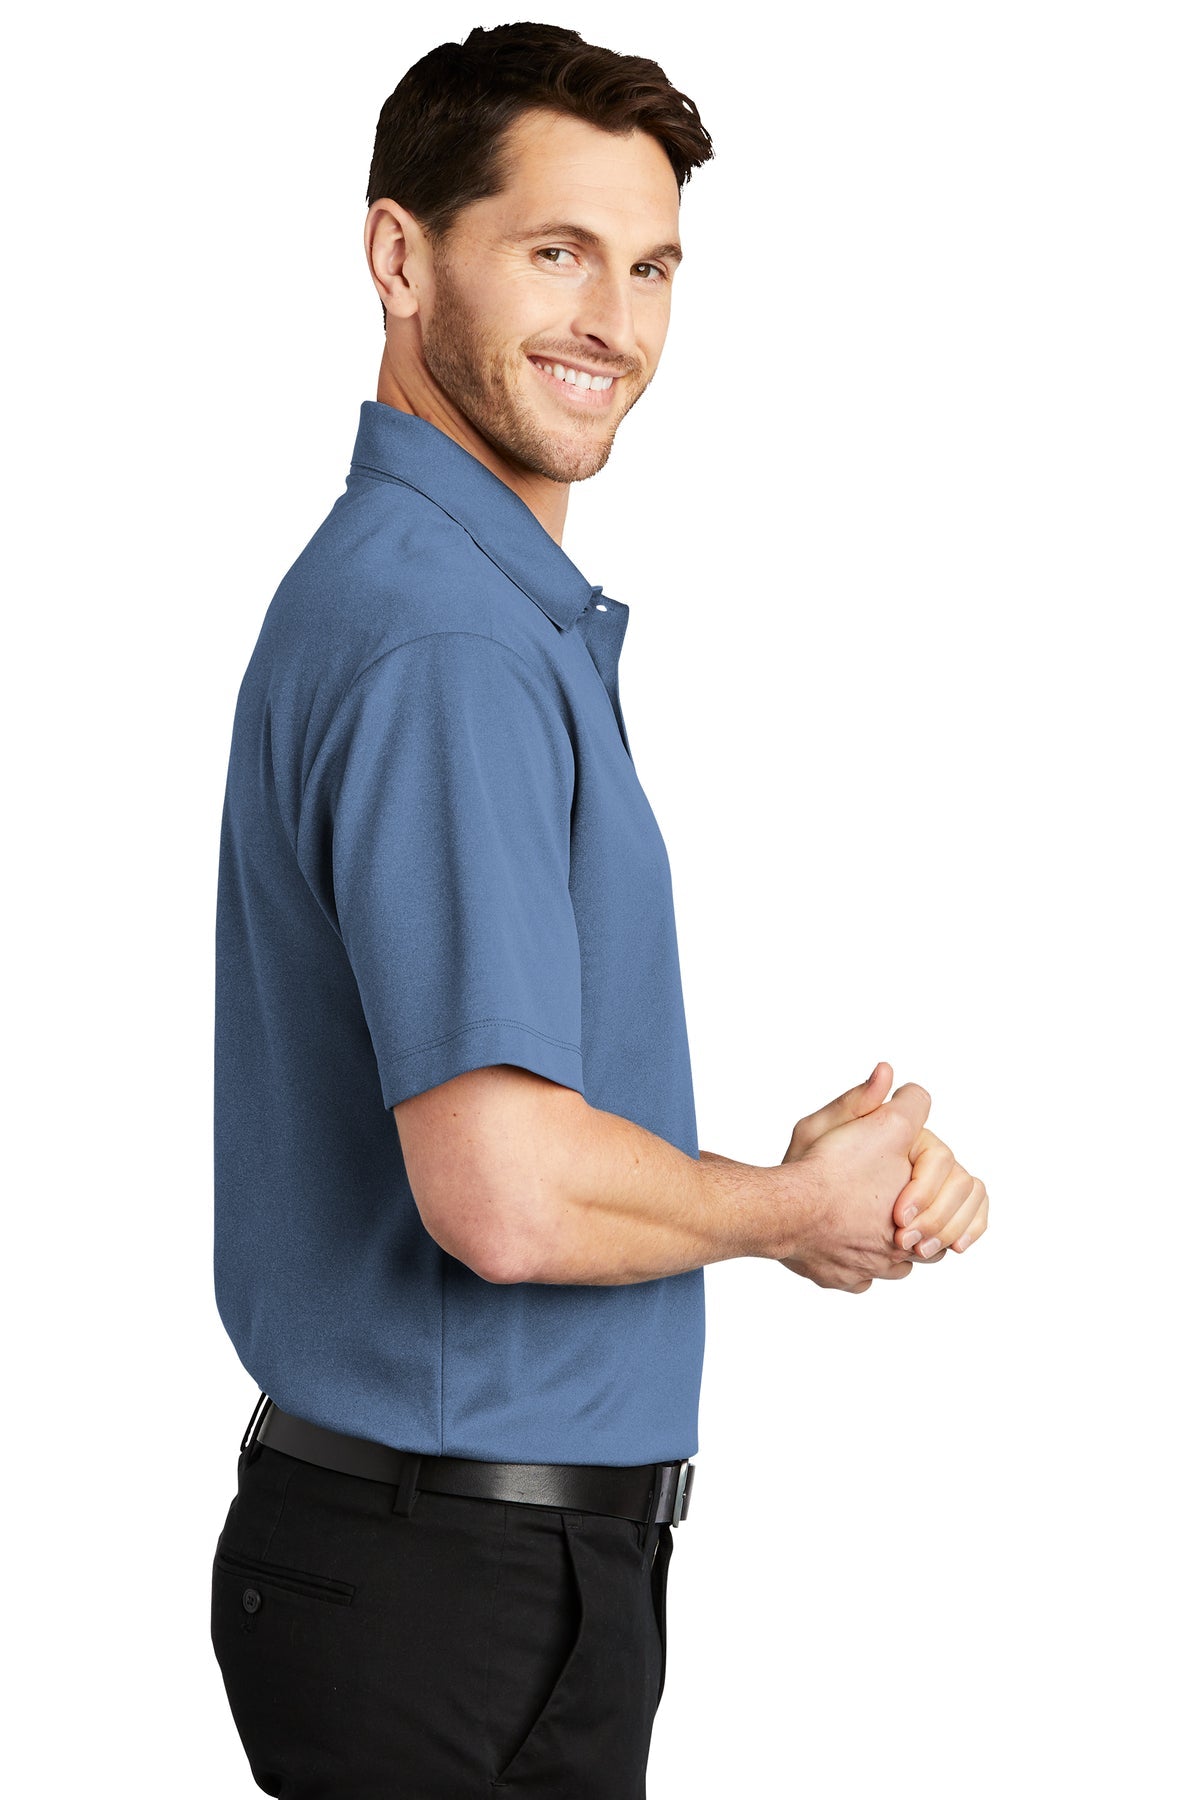 K542 Port Authority® Heathered Silk Touch™ Performance Polo